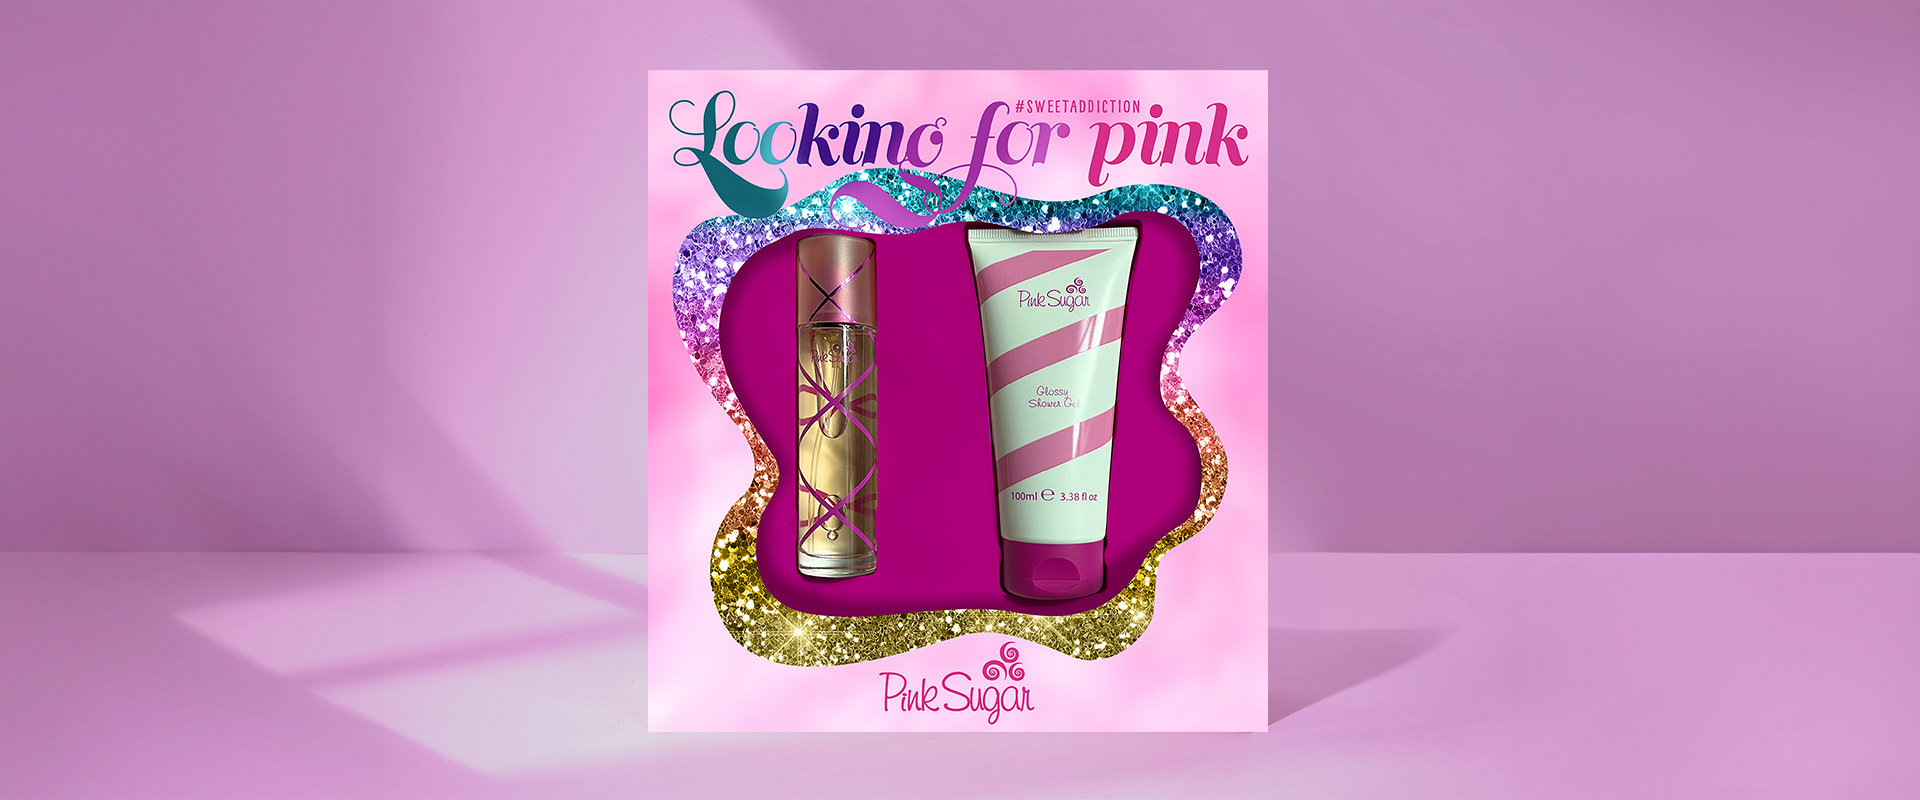 The graphic design ATC created for the 2023 edition of the Pink Sugar box